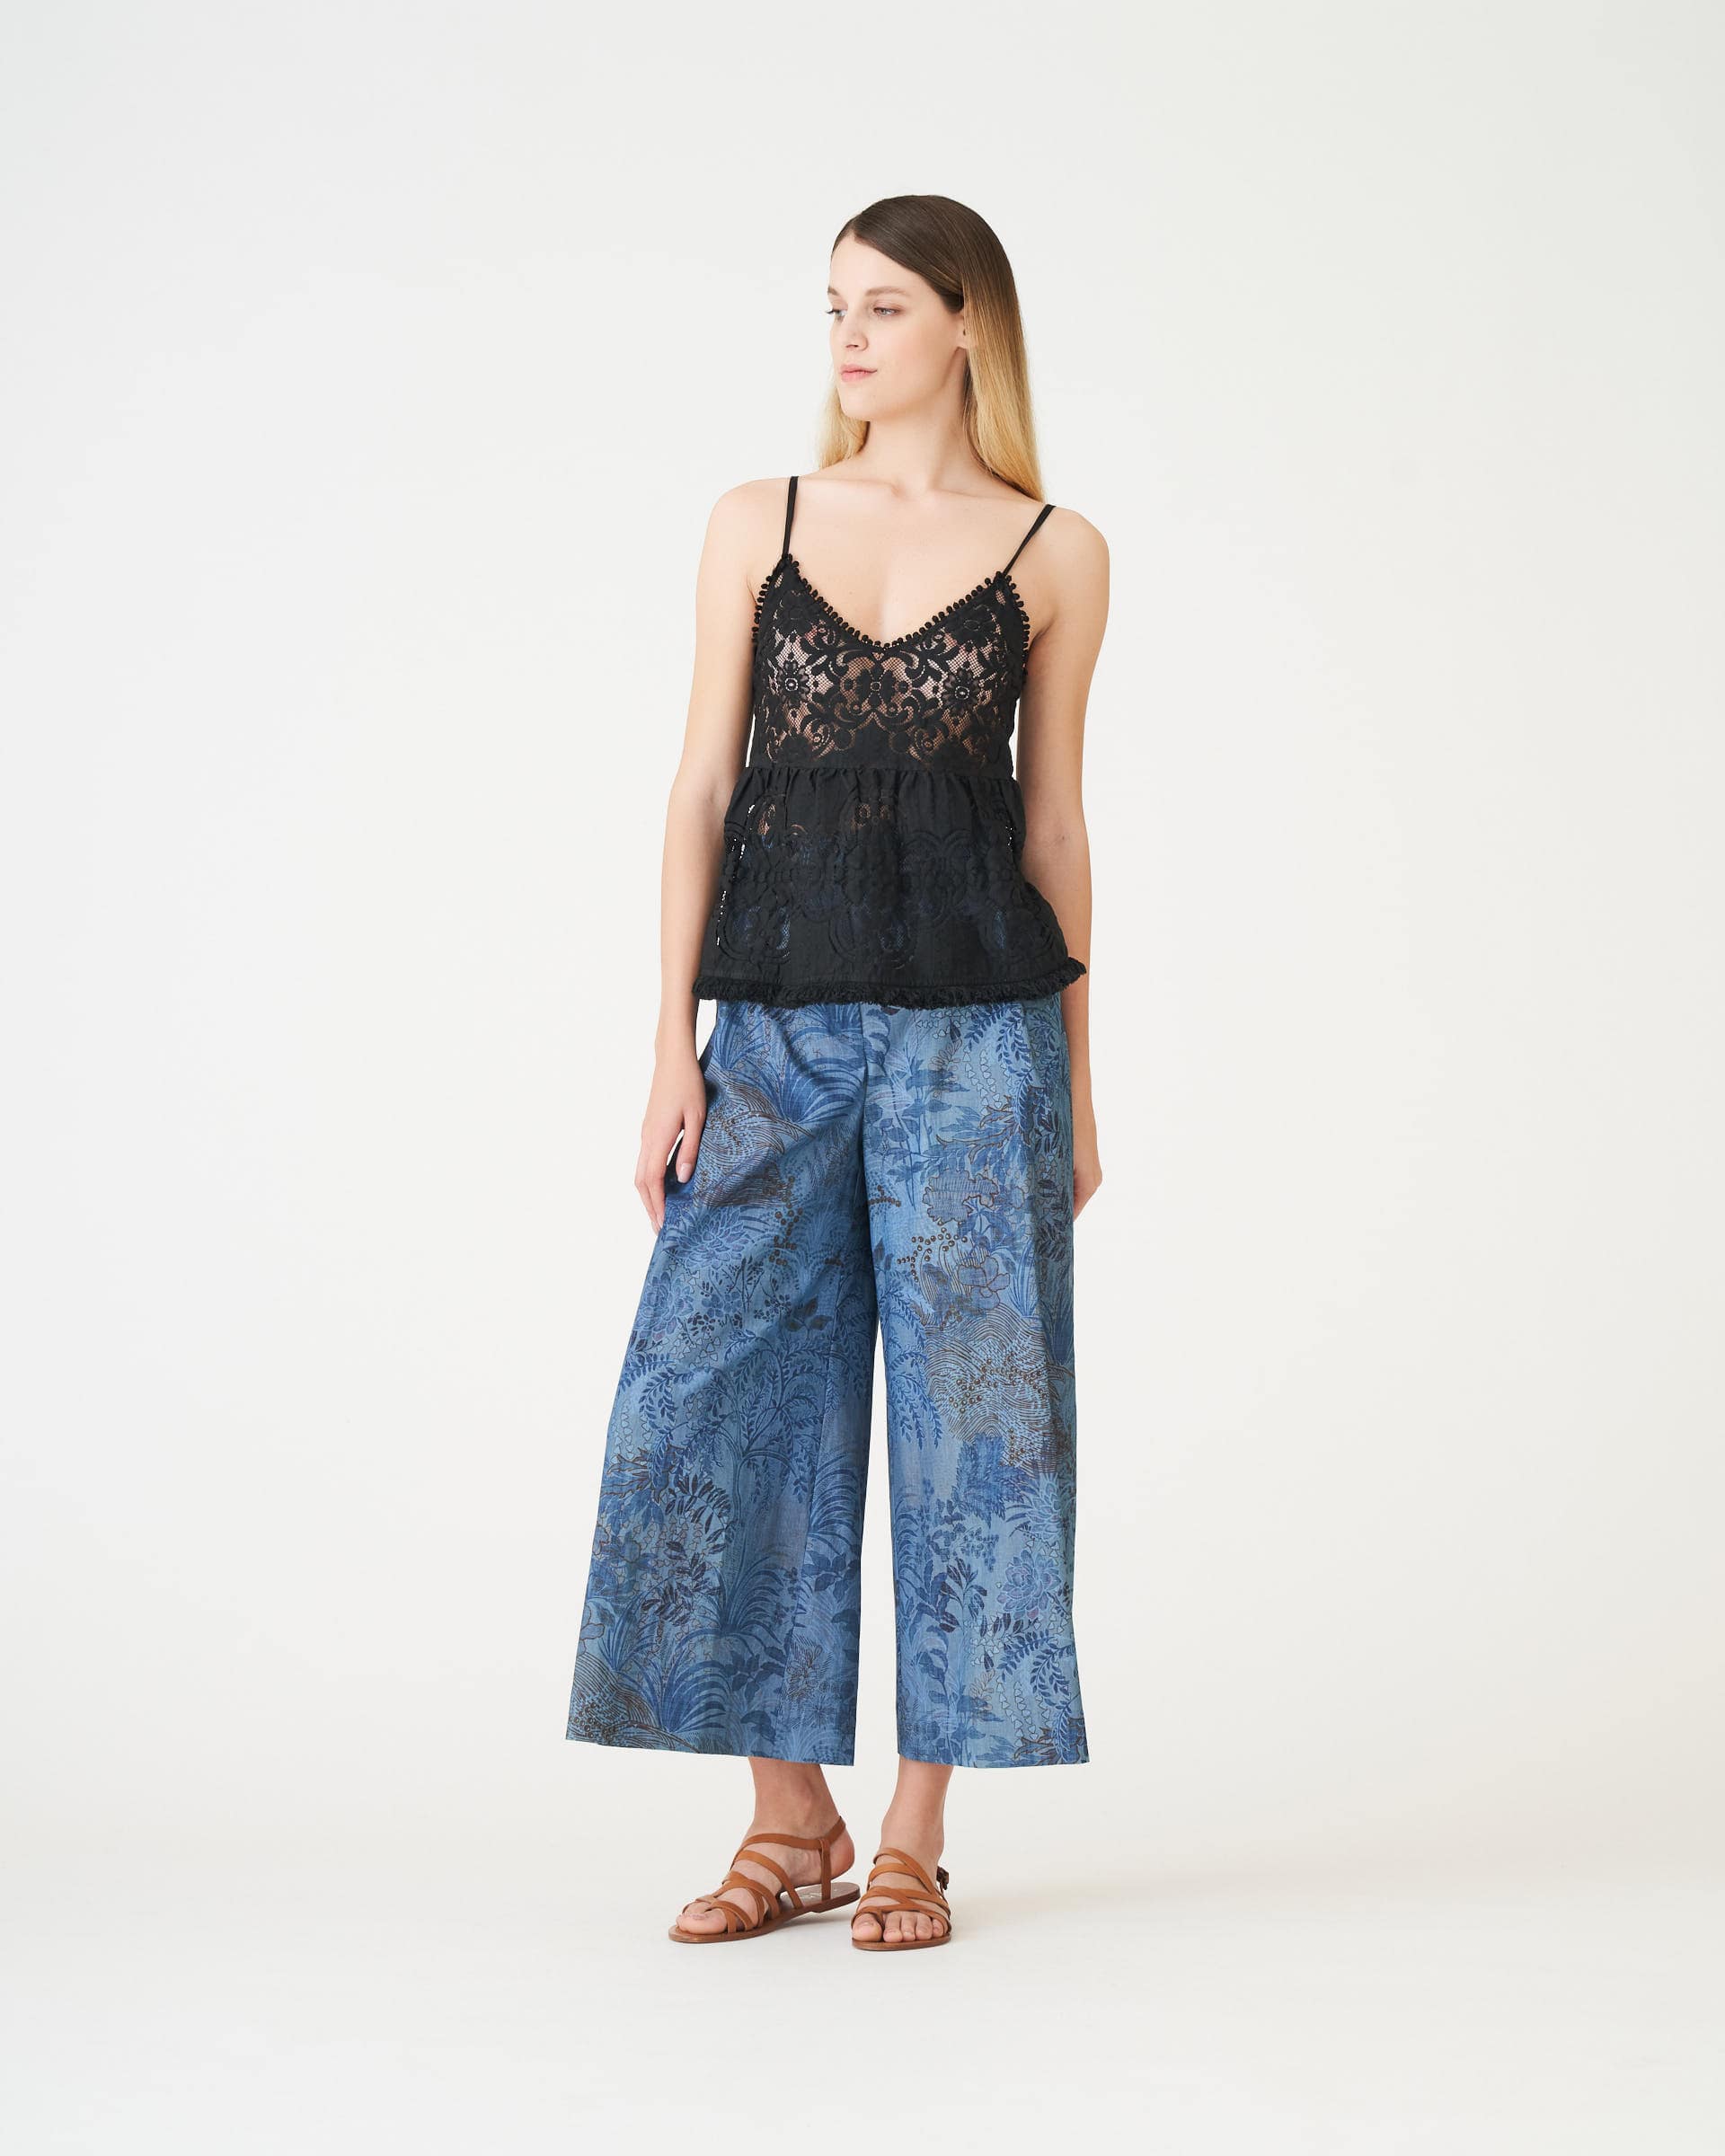 The Market Store | Lace Top